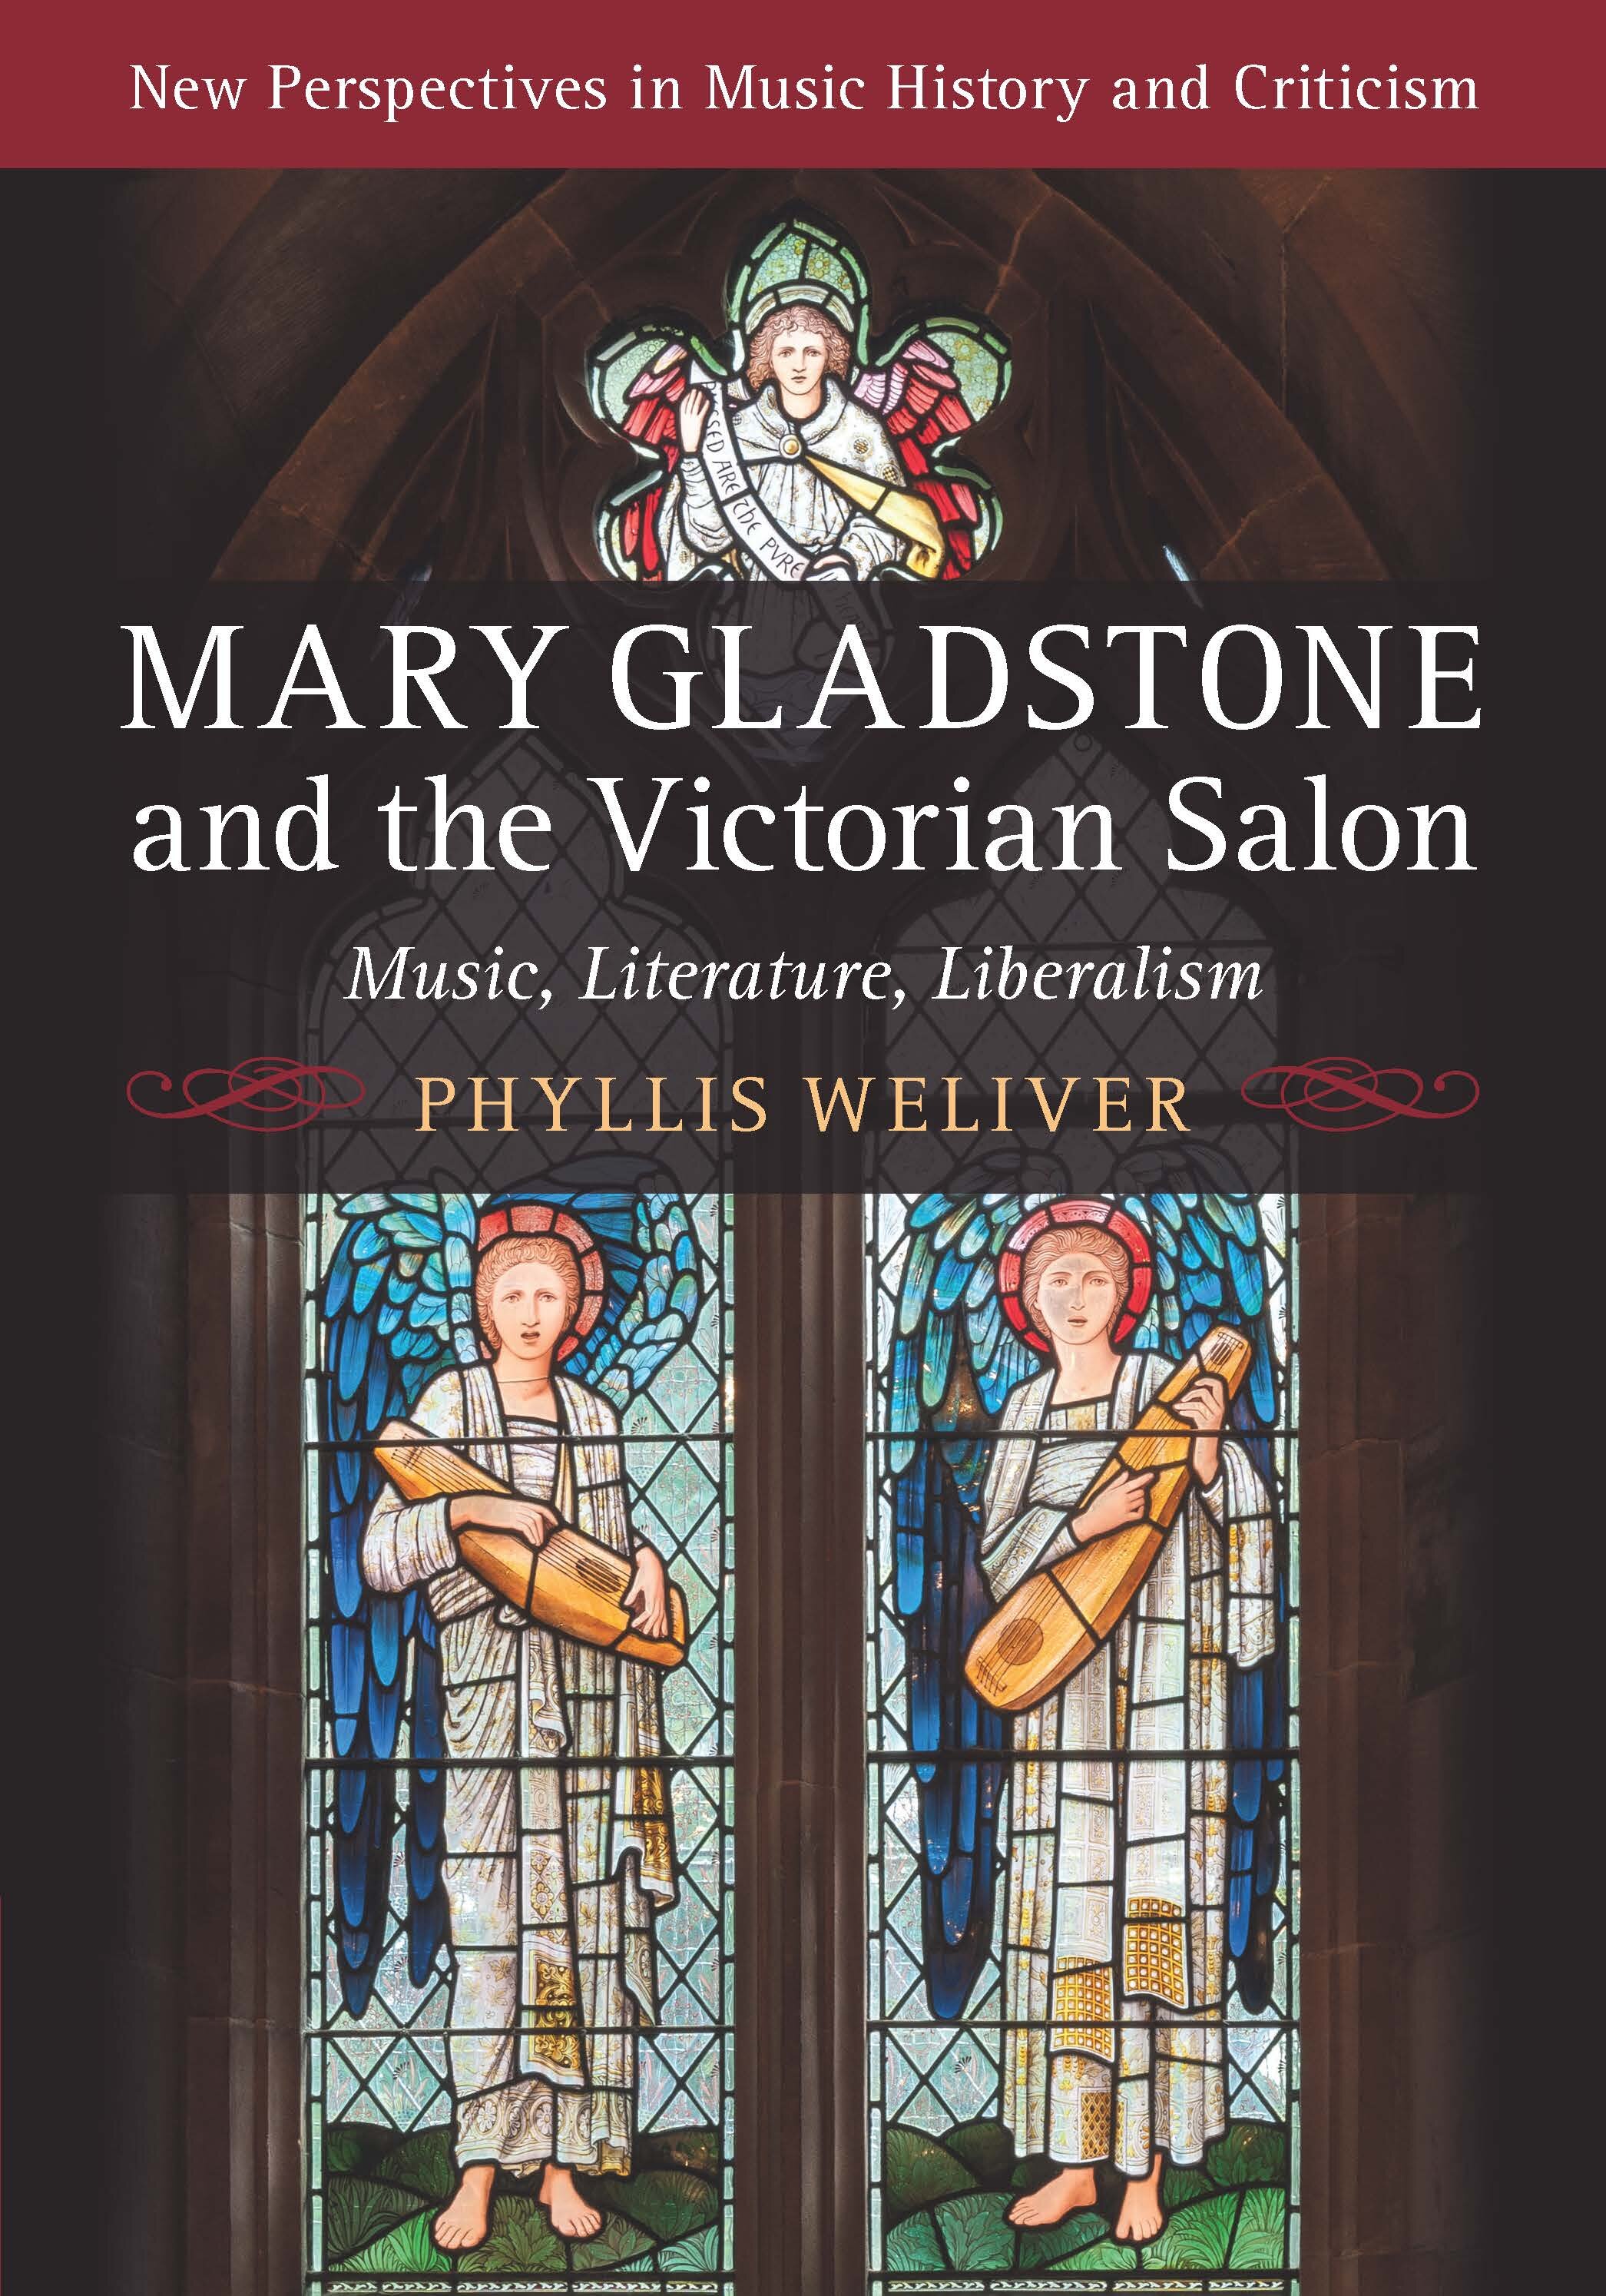 Mary Gladstone and the Victorian Salon_Cover _ higher resolution - Copy.jpg